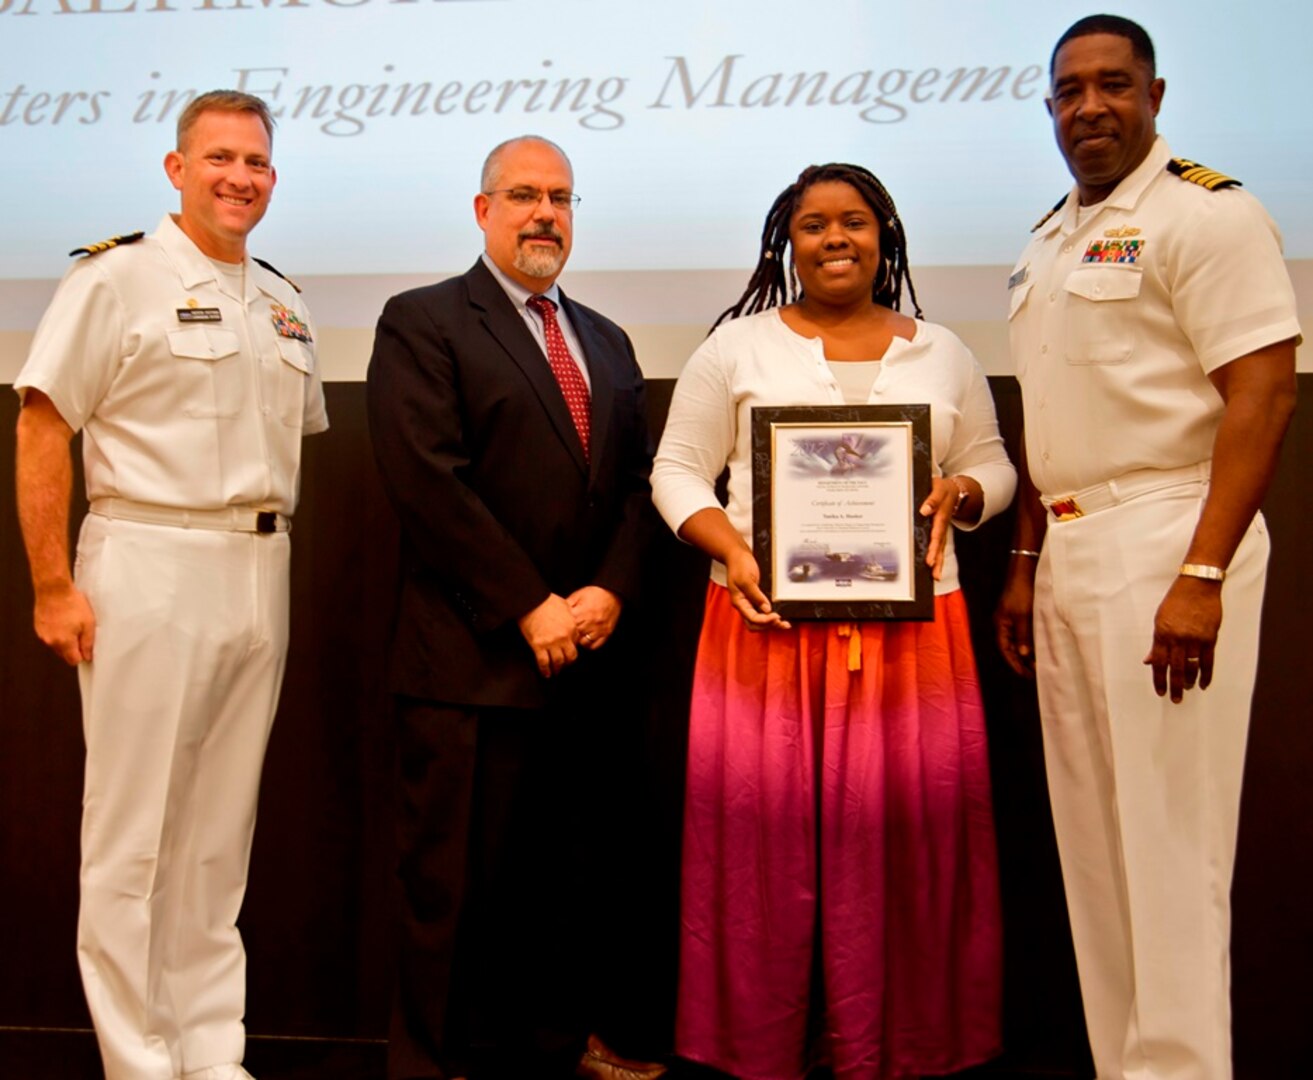 IMAGE: DAHLGREN, Va. - Tanika Hooker receives her certificate of achievement from Naval Surface Warfare Center Dahlgren Division (NSWCDD) Technical Director John Fiore, NSWCDD Commanding Officer Capt. Godfrey 'Gus' Weekes, right, and Combat Direction Systems Activity Dam Neck Commanding Officer Cmdr. Andrew Hoffman at the 2017 NSWCDD academic awards ceremony. Hooker was recognized for completing her master's in engineering management from the University of Maryland University College, and commended for her commitment to personal and professional development.